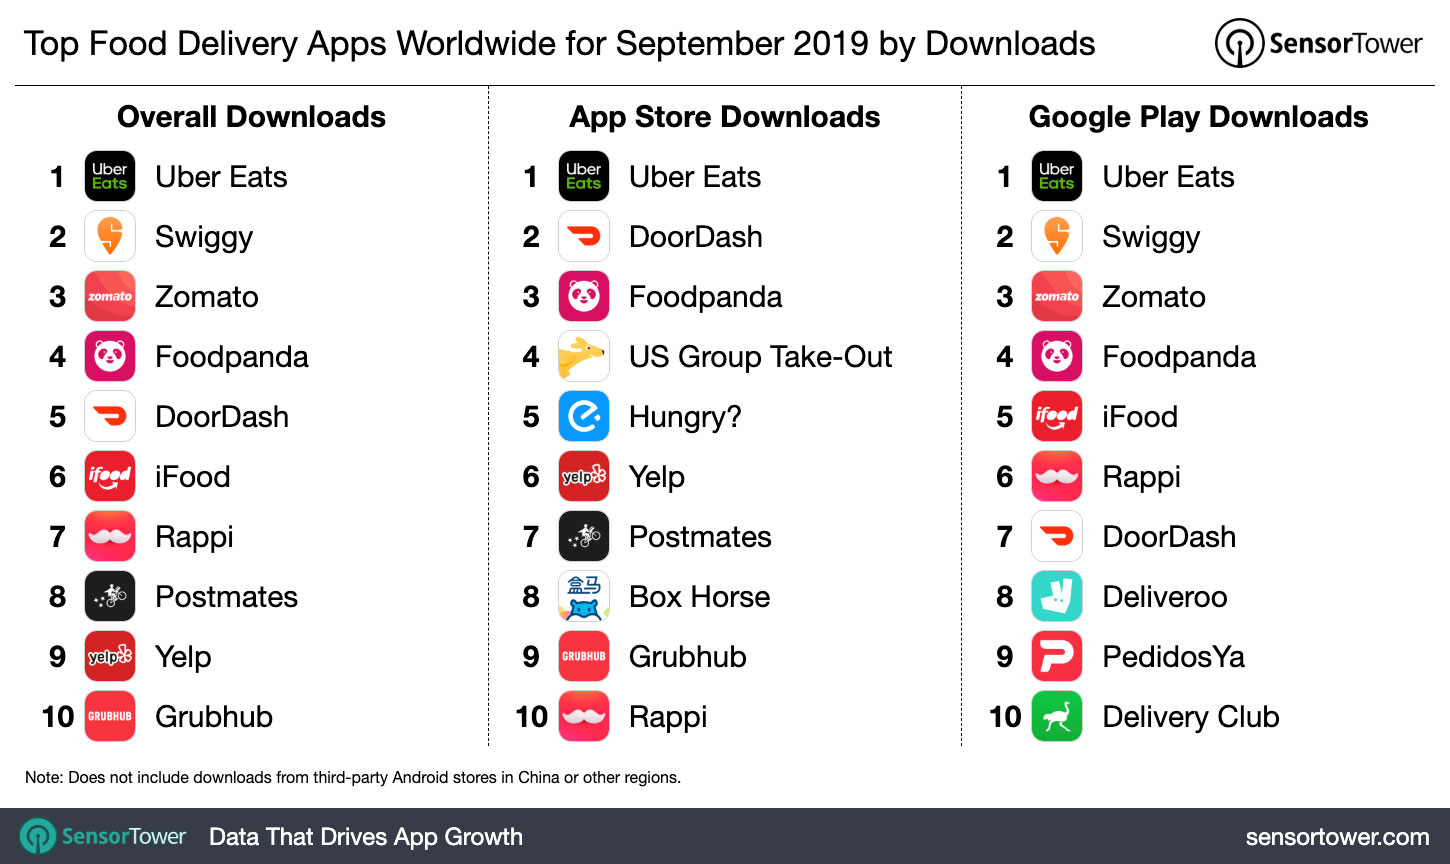 Top Food Delivery Apps Worldwide for September 2019 by Downloads